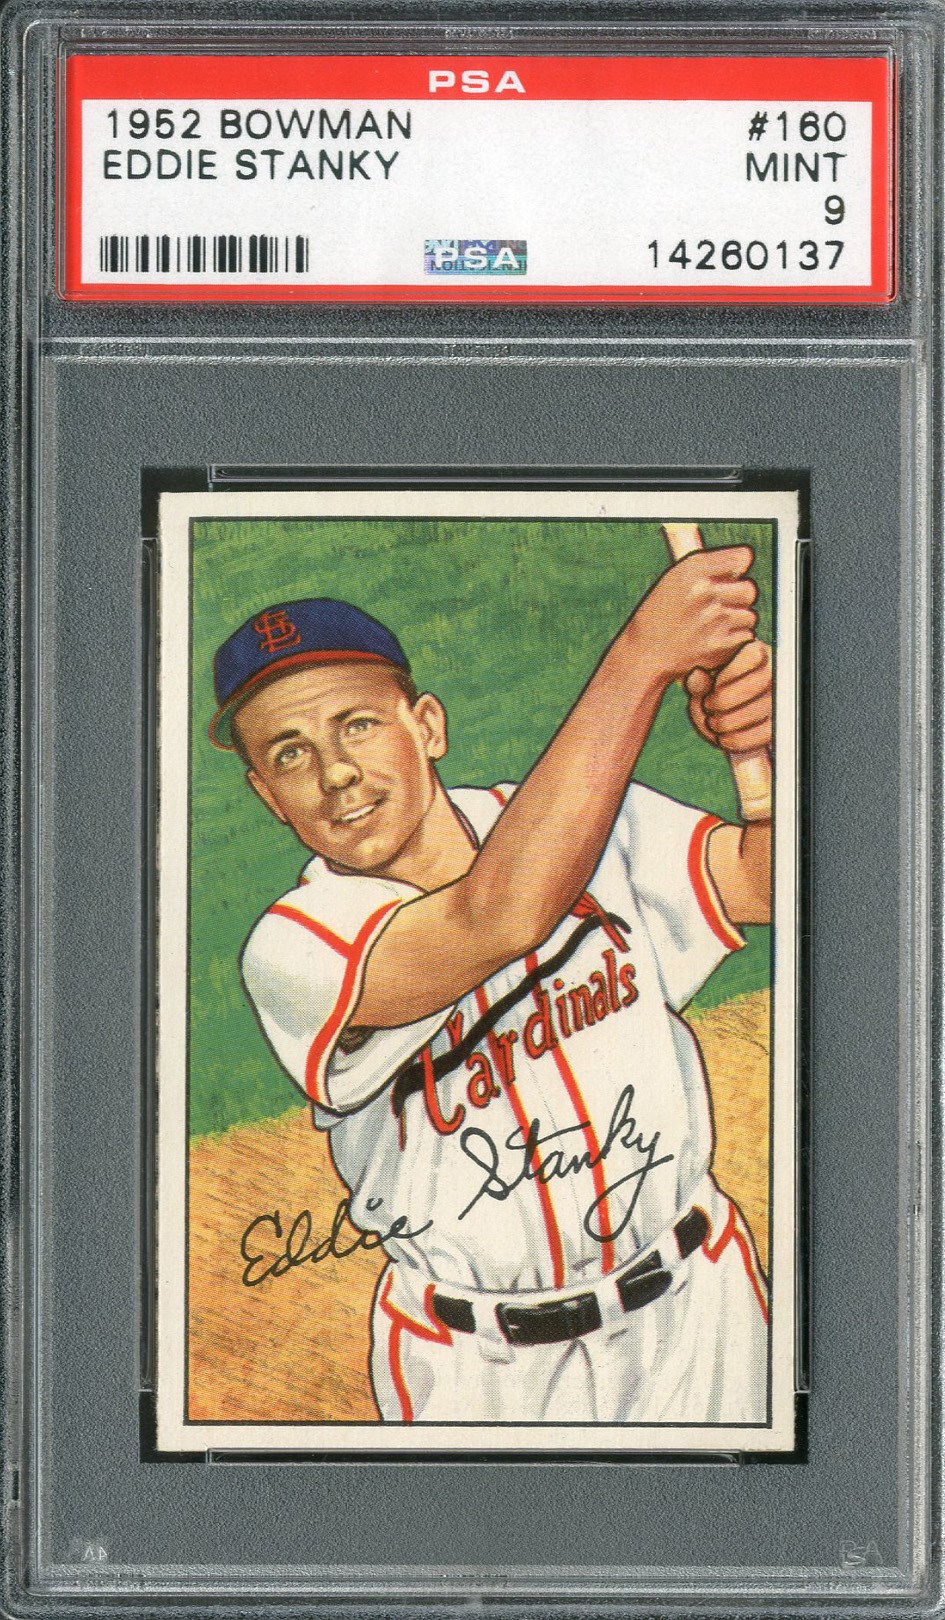 Baseball and Trading Cards - 1952 Bowman #160 Eddie Stanky PSA MINT 9